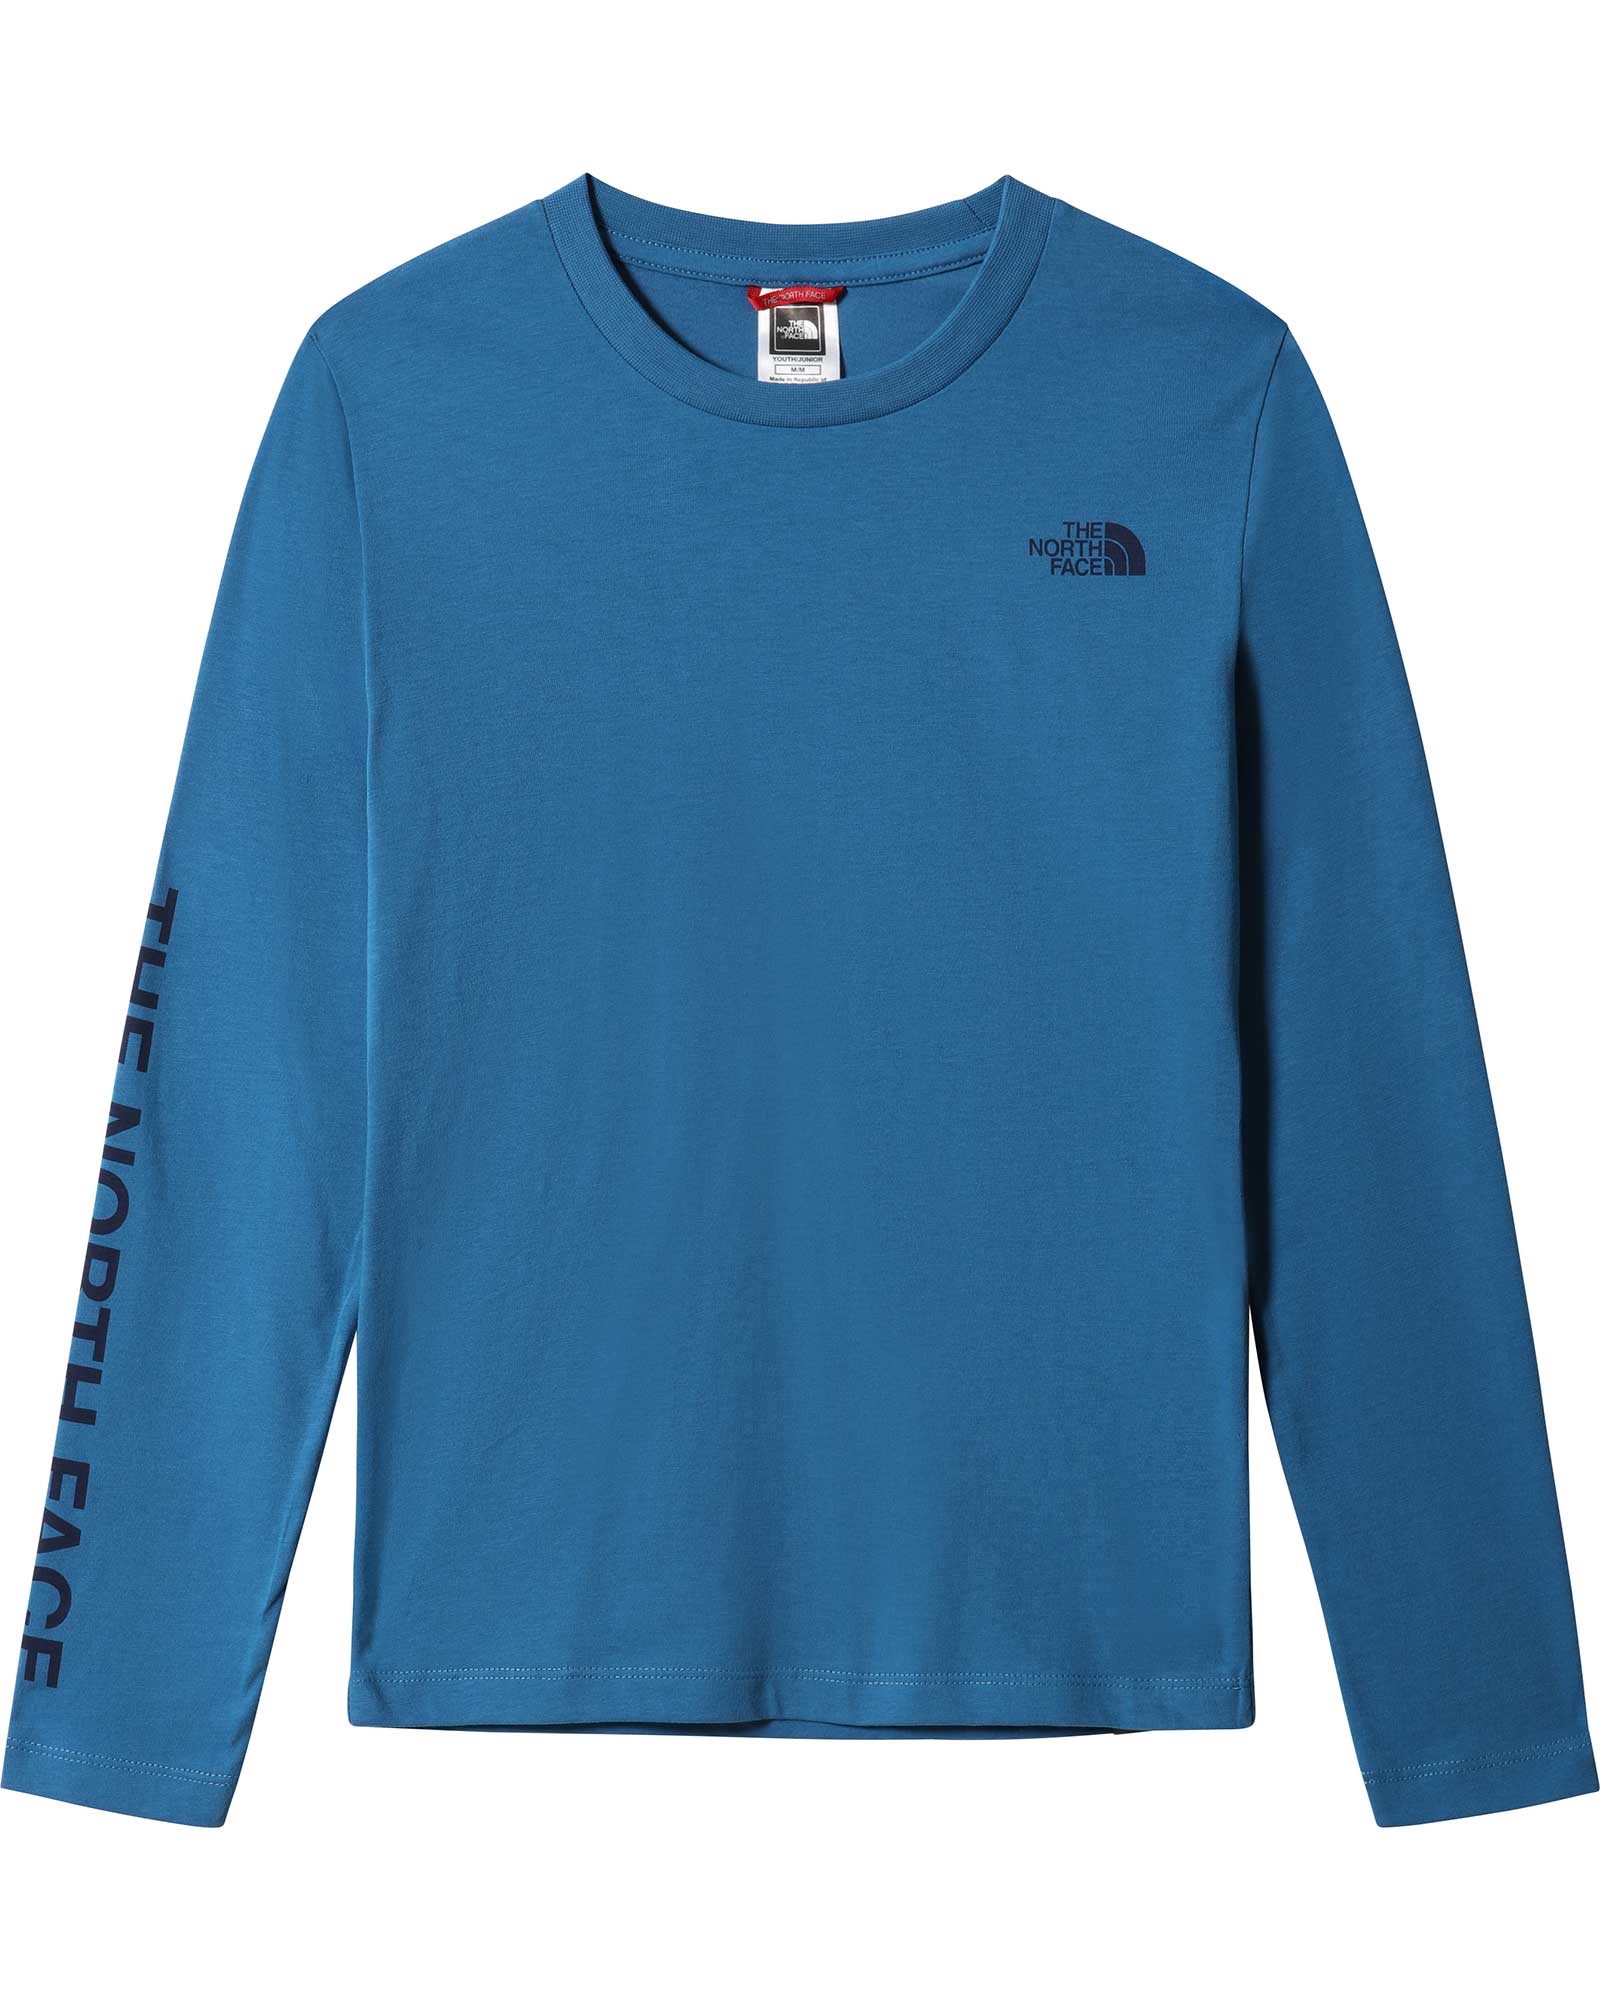 Product image of The North Face Youth Youth Long Sleeve Simple Dome Kids' T-Shirt